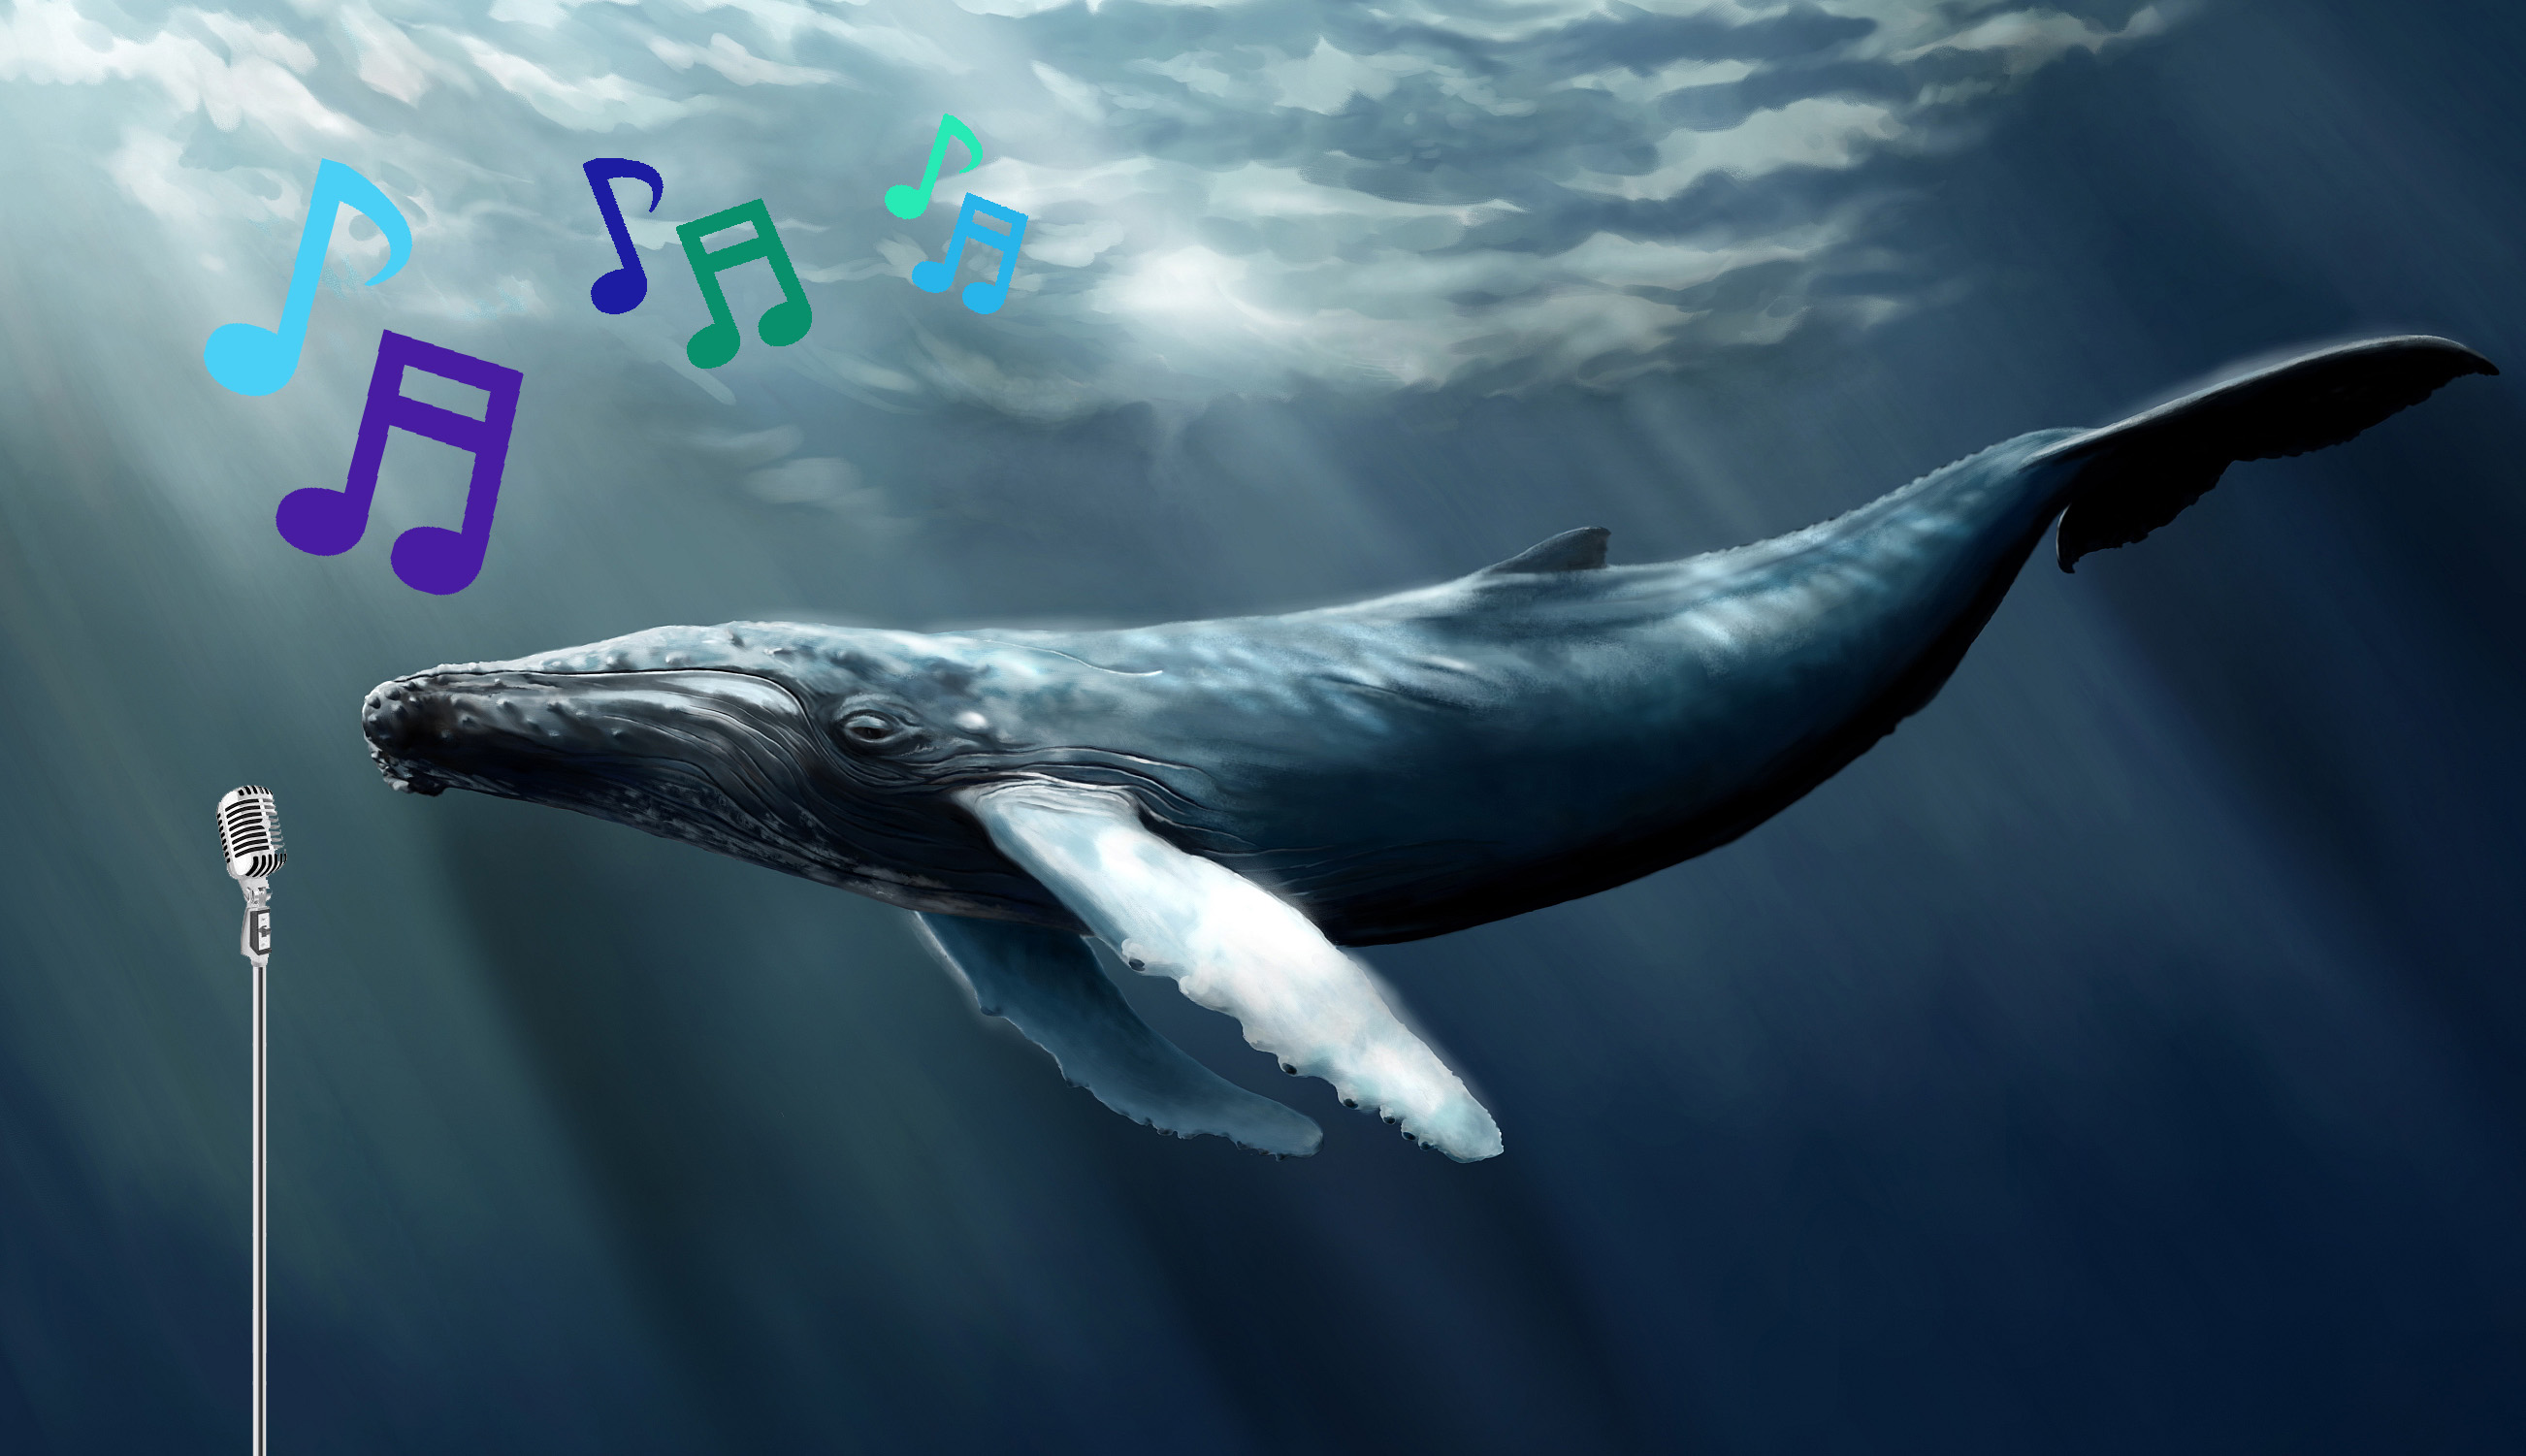 Humpback whales have pop music.